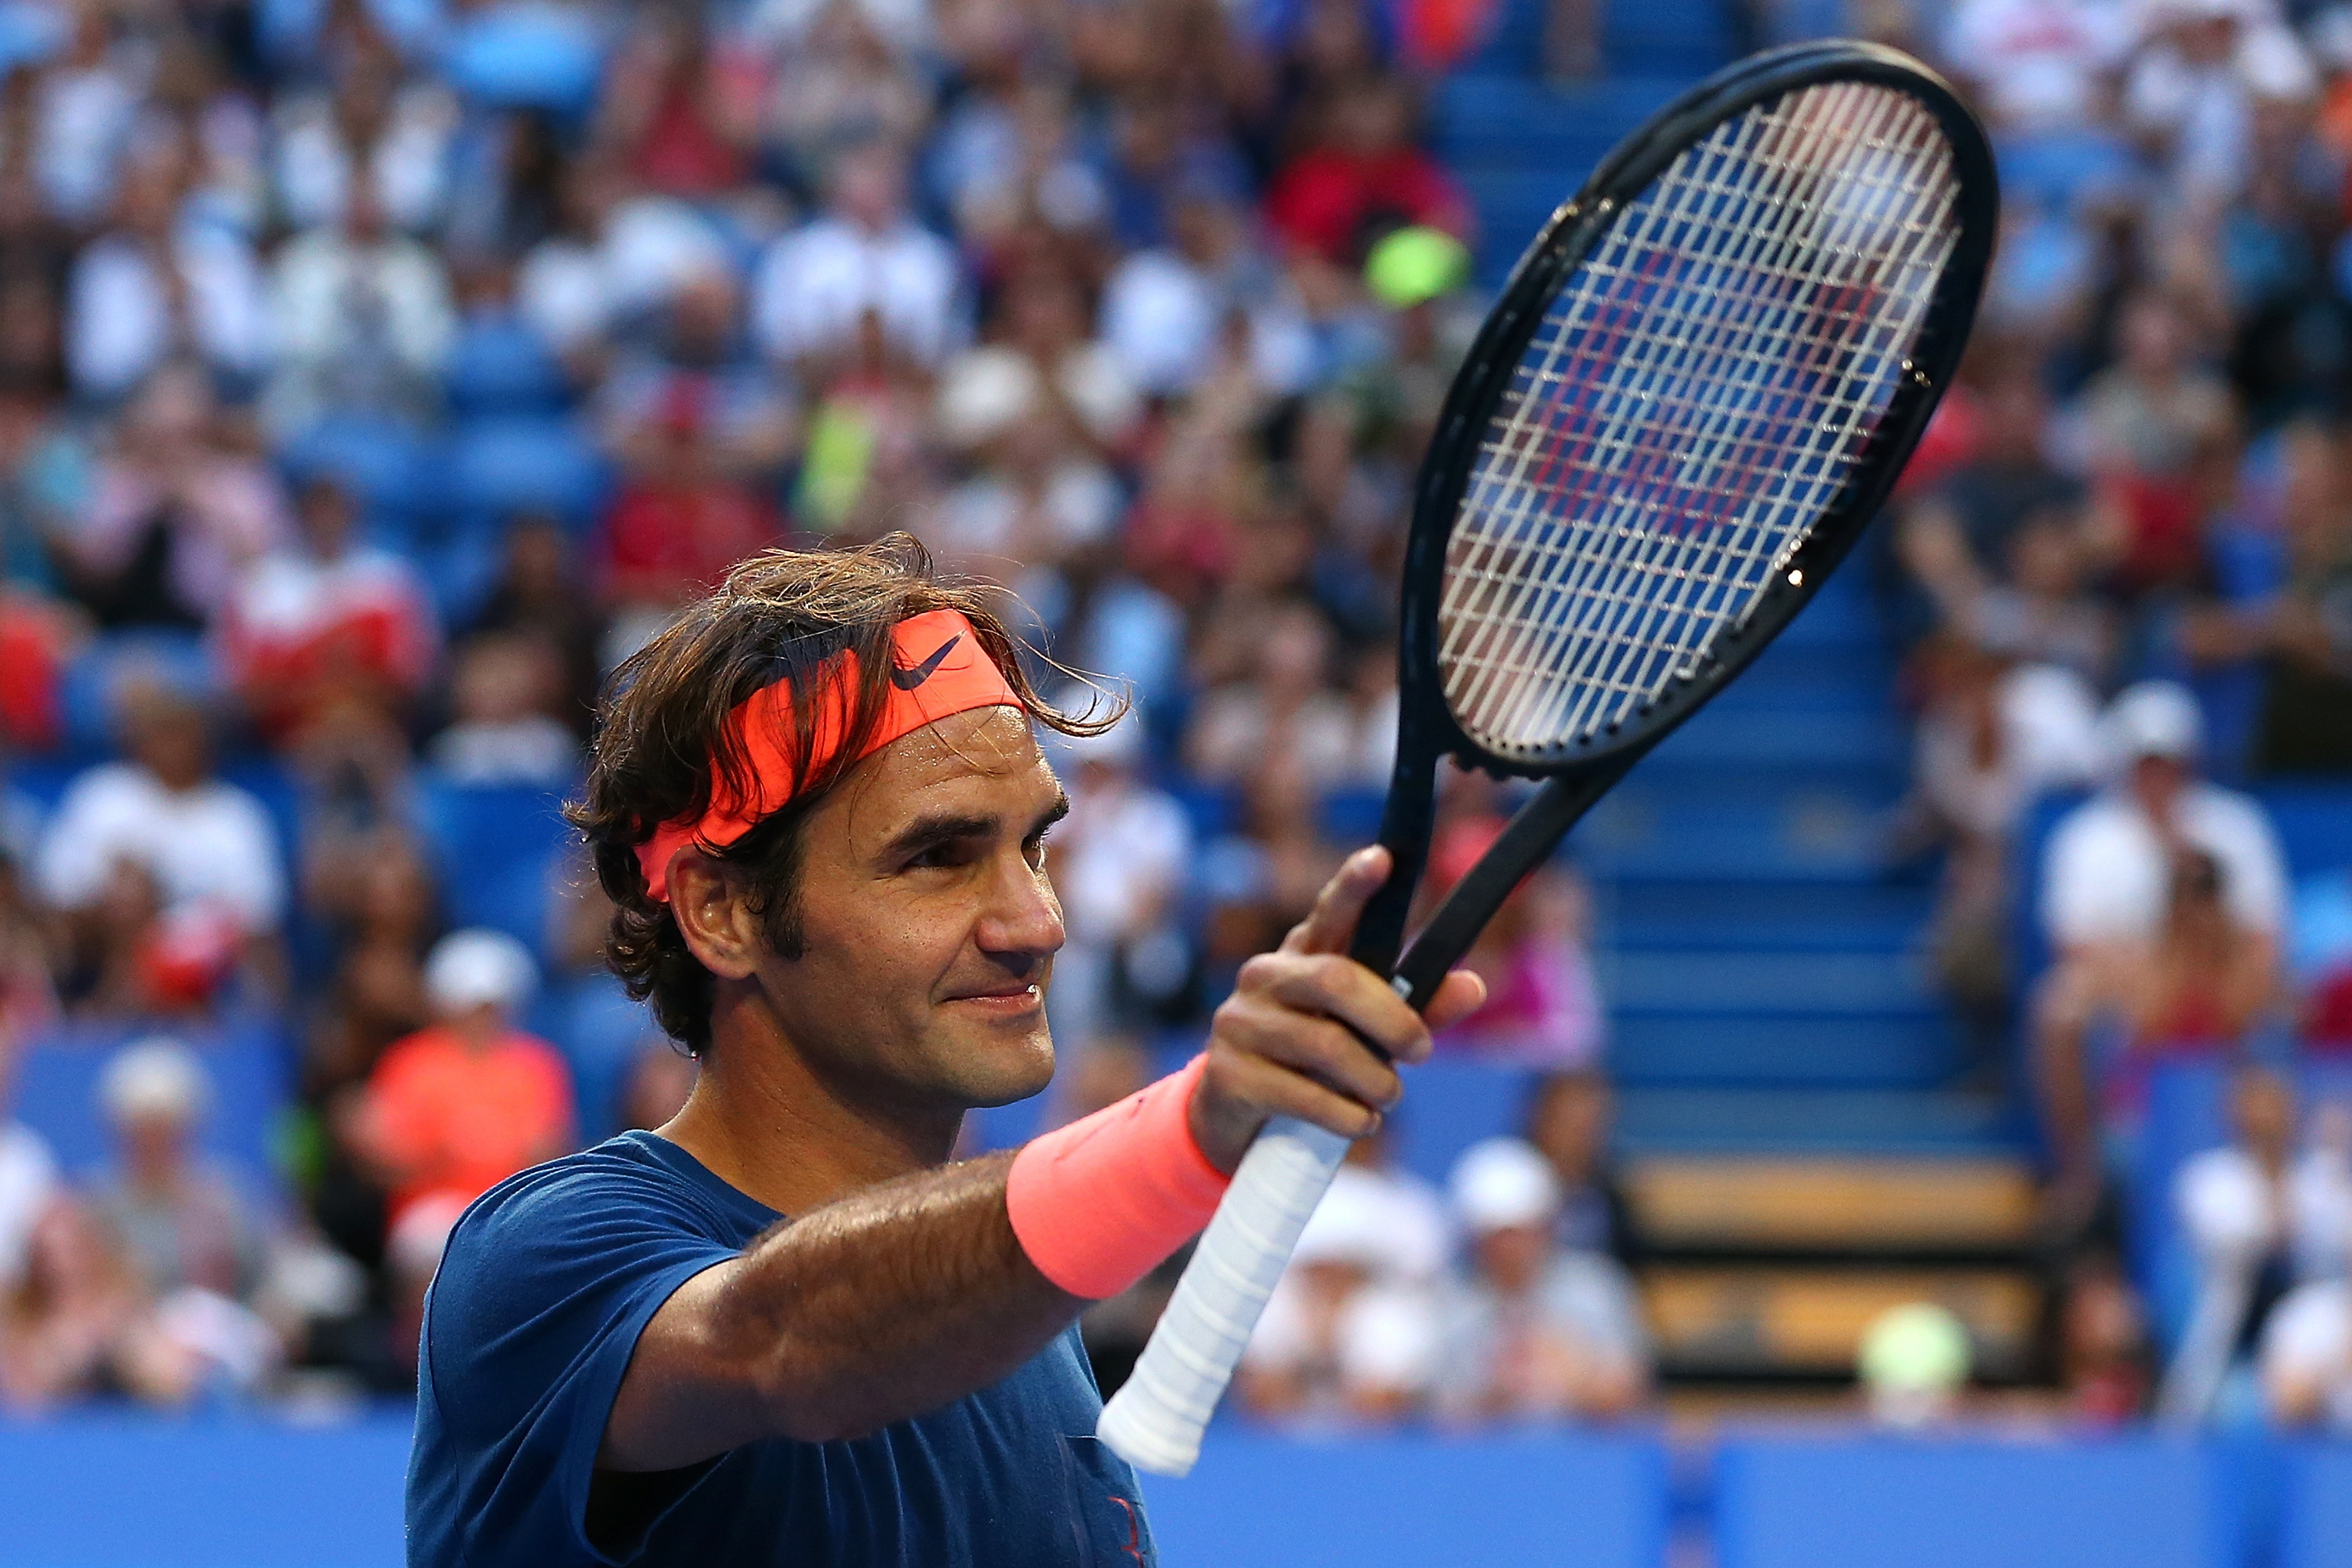 Hopman Cup 2017: Monday Tennis Scores, Results and Updated Schedule | Bleacher Report